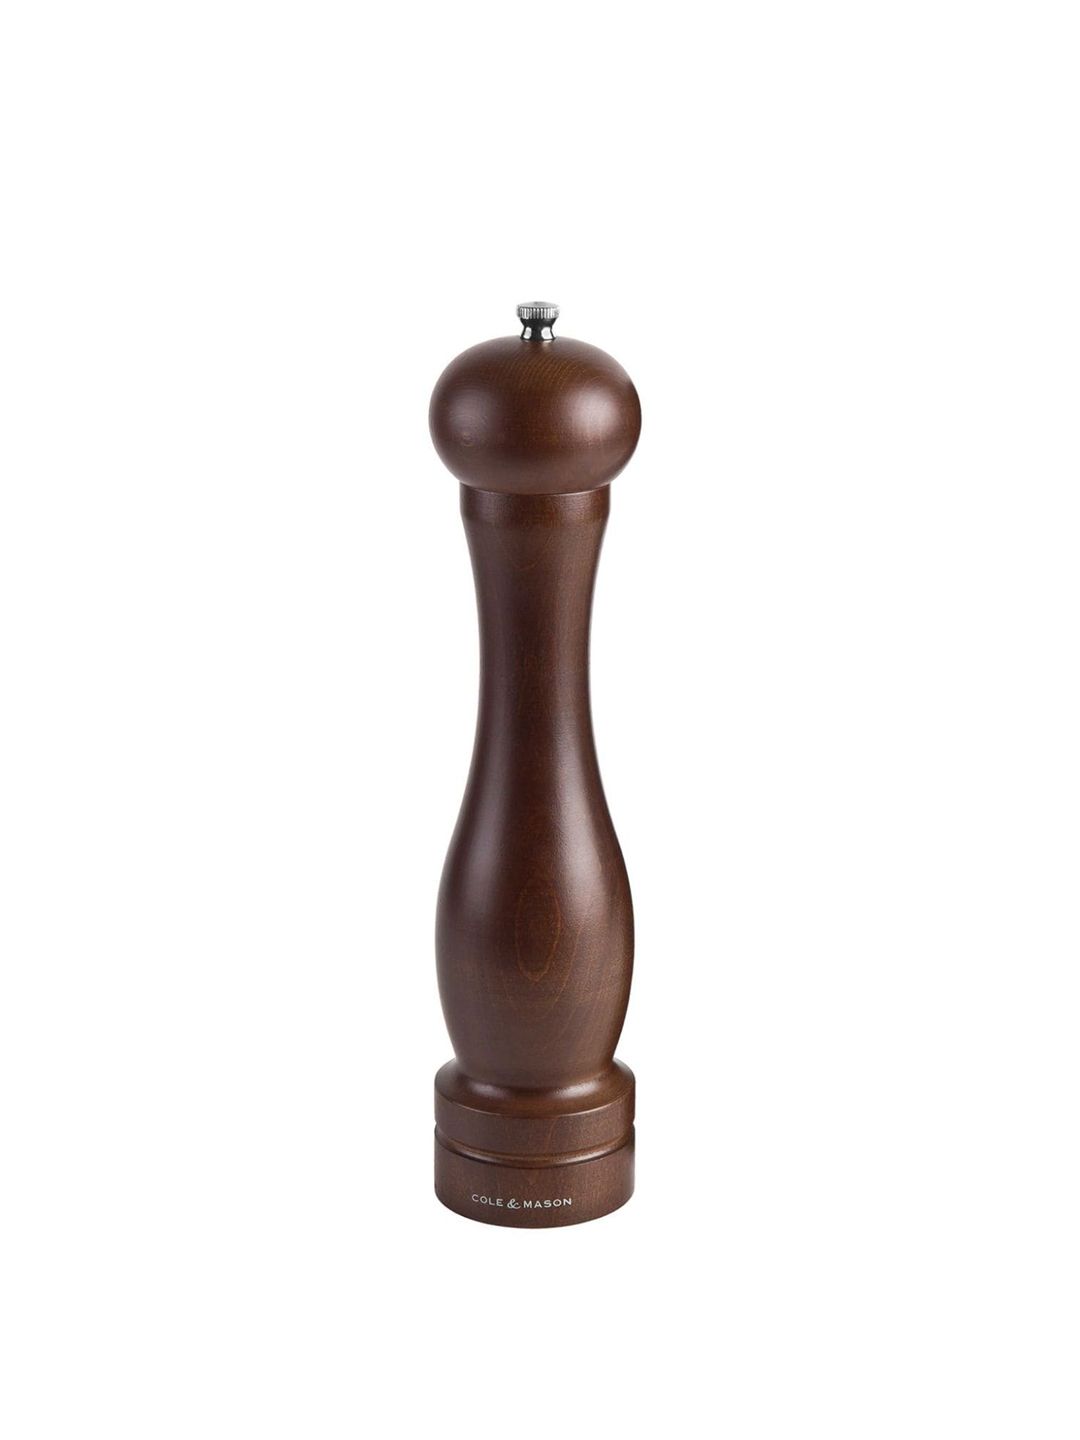 COLE & MASON Brown Solid Salt & Pepper Shaker Price in India